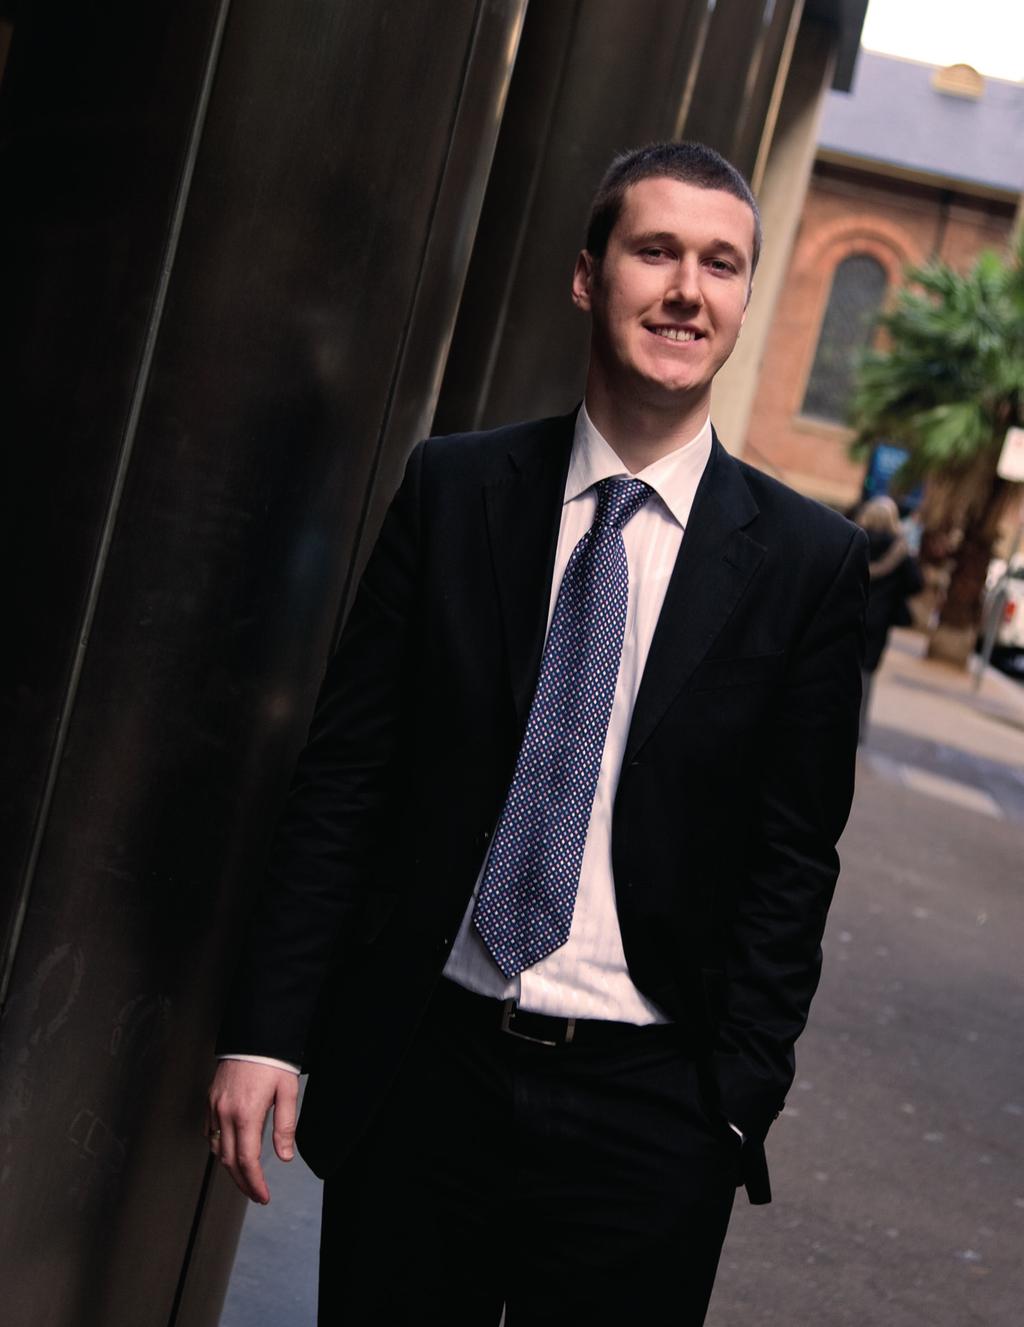 Jason Donnelly COURSE CONVENOR GRADUATE DIPLOMA IN AUSTRALIAN MIGRATION LAW Jason Donnelly has significant teaching and practical experience in the law.